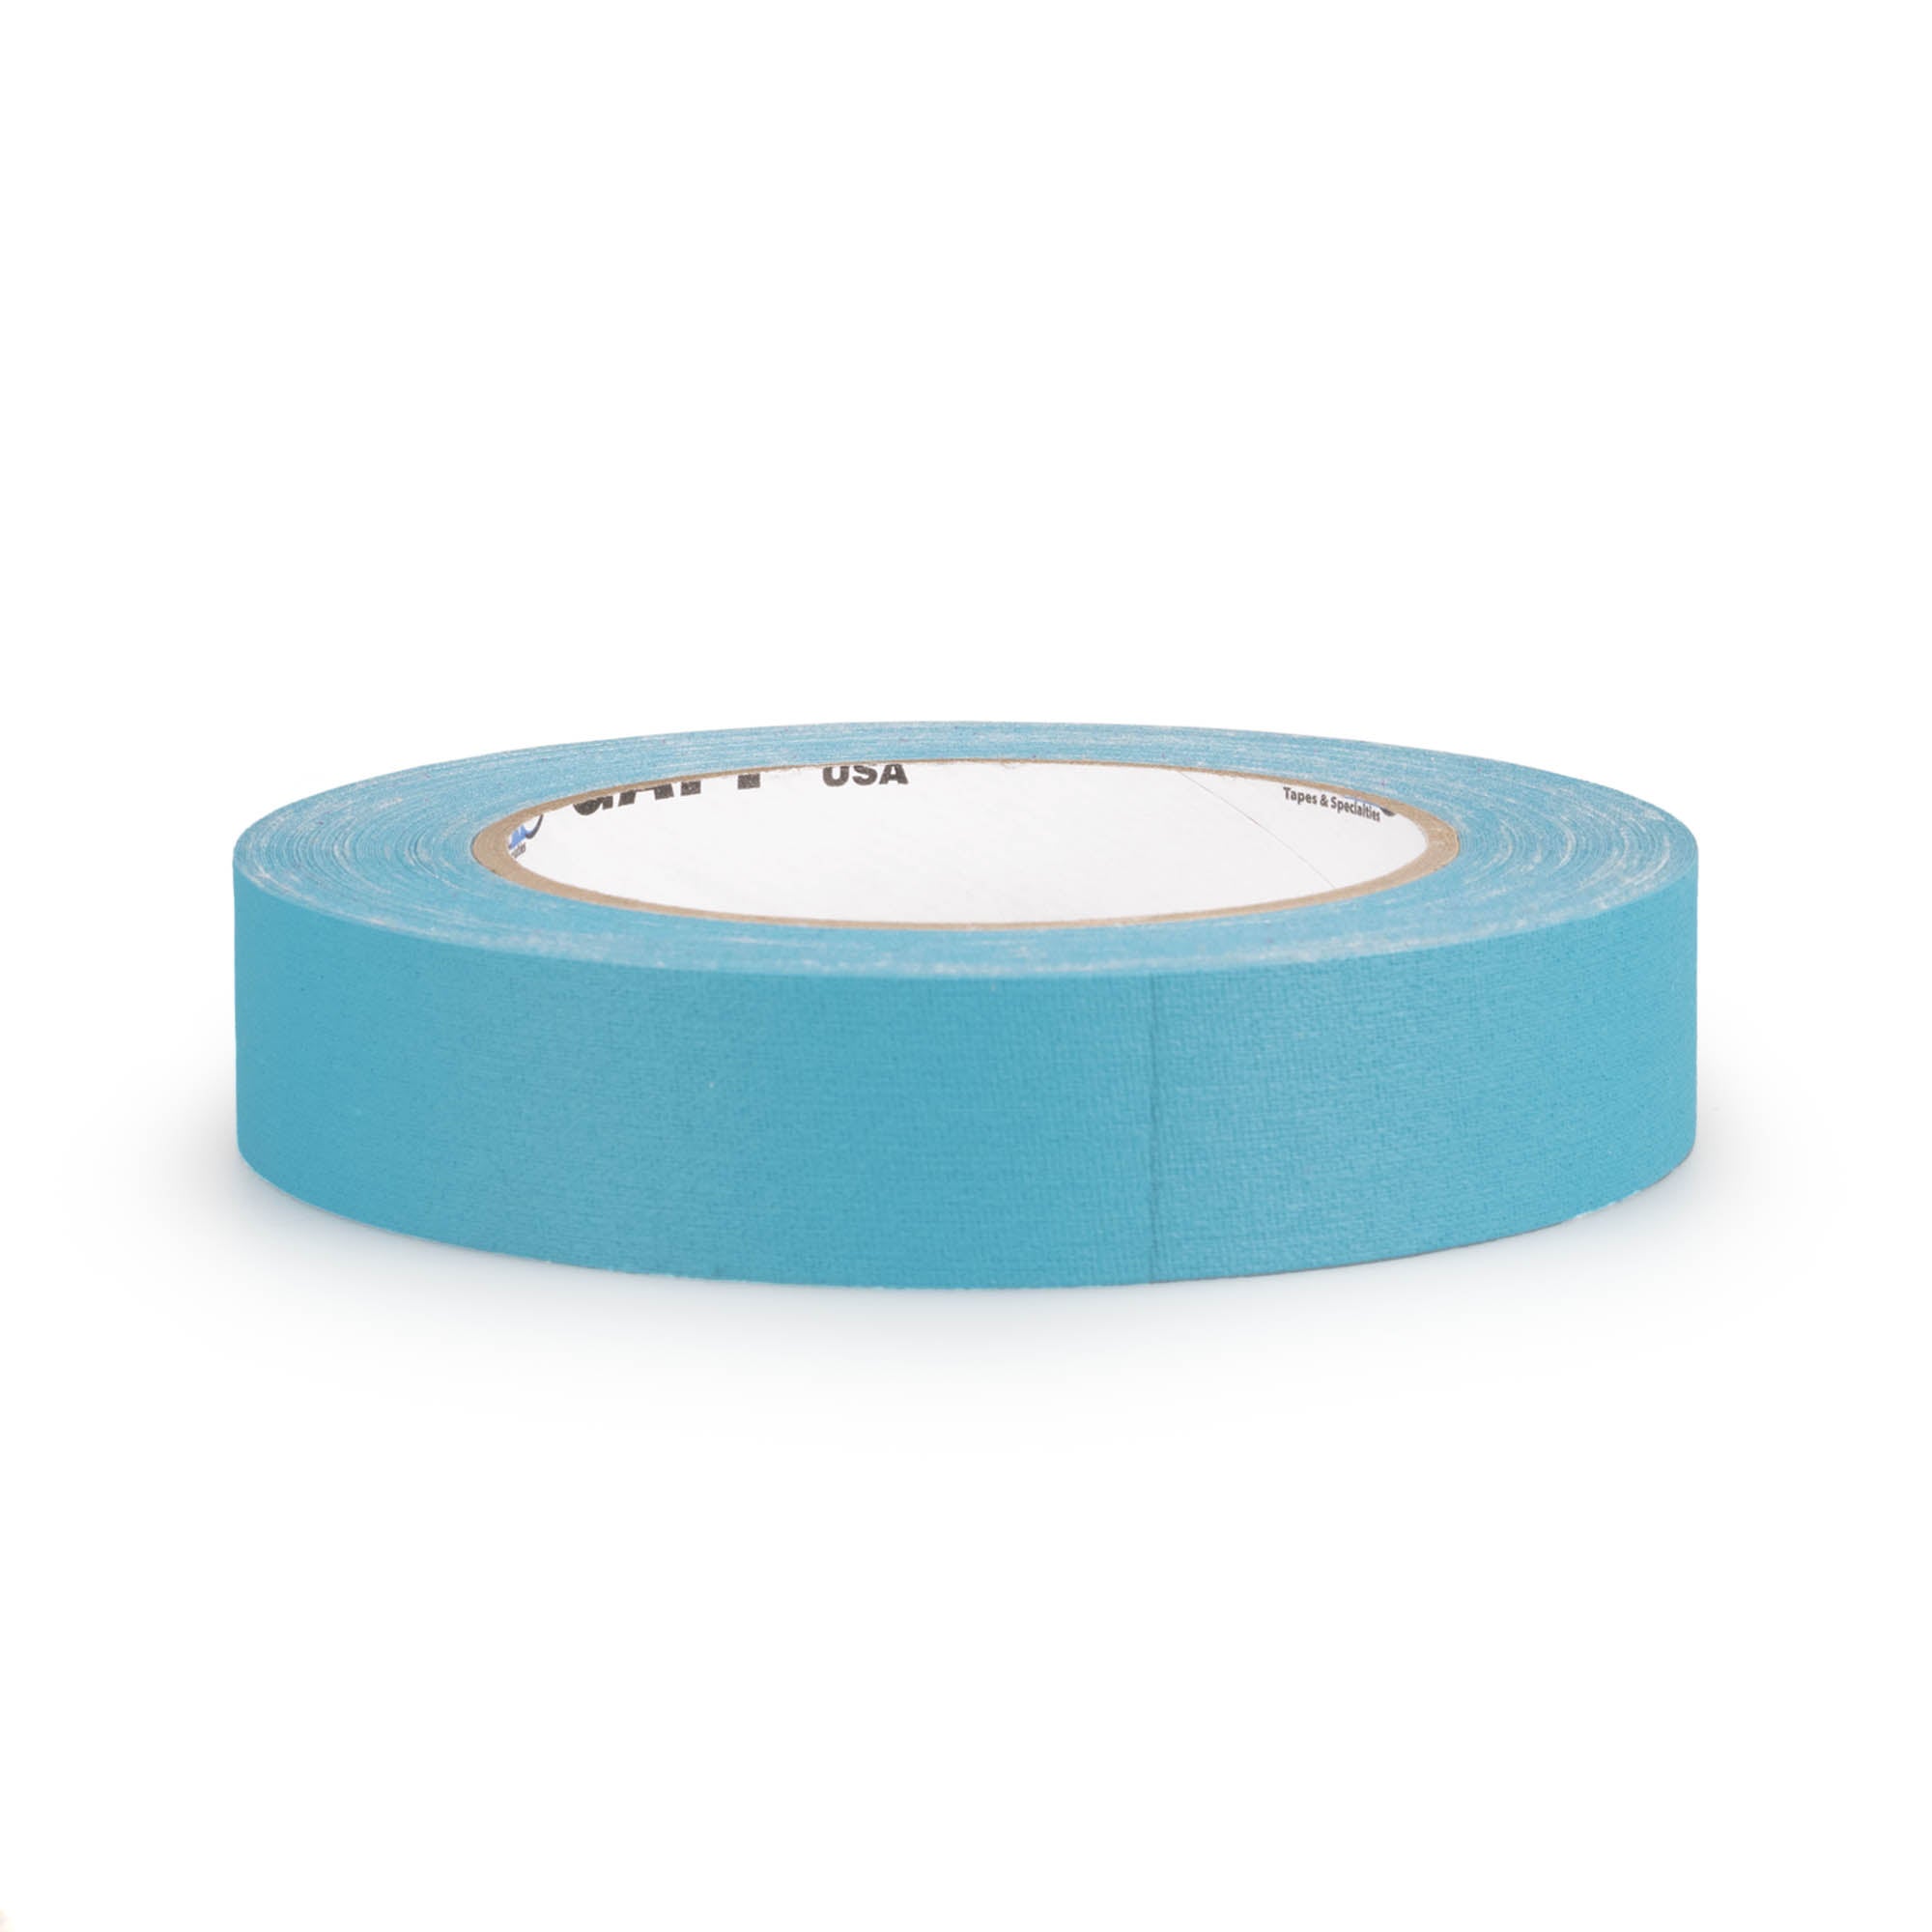 25m roll of pro gaff fabric adhesive tape in teal laying in a white background